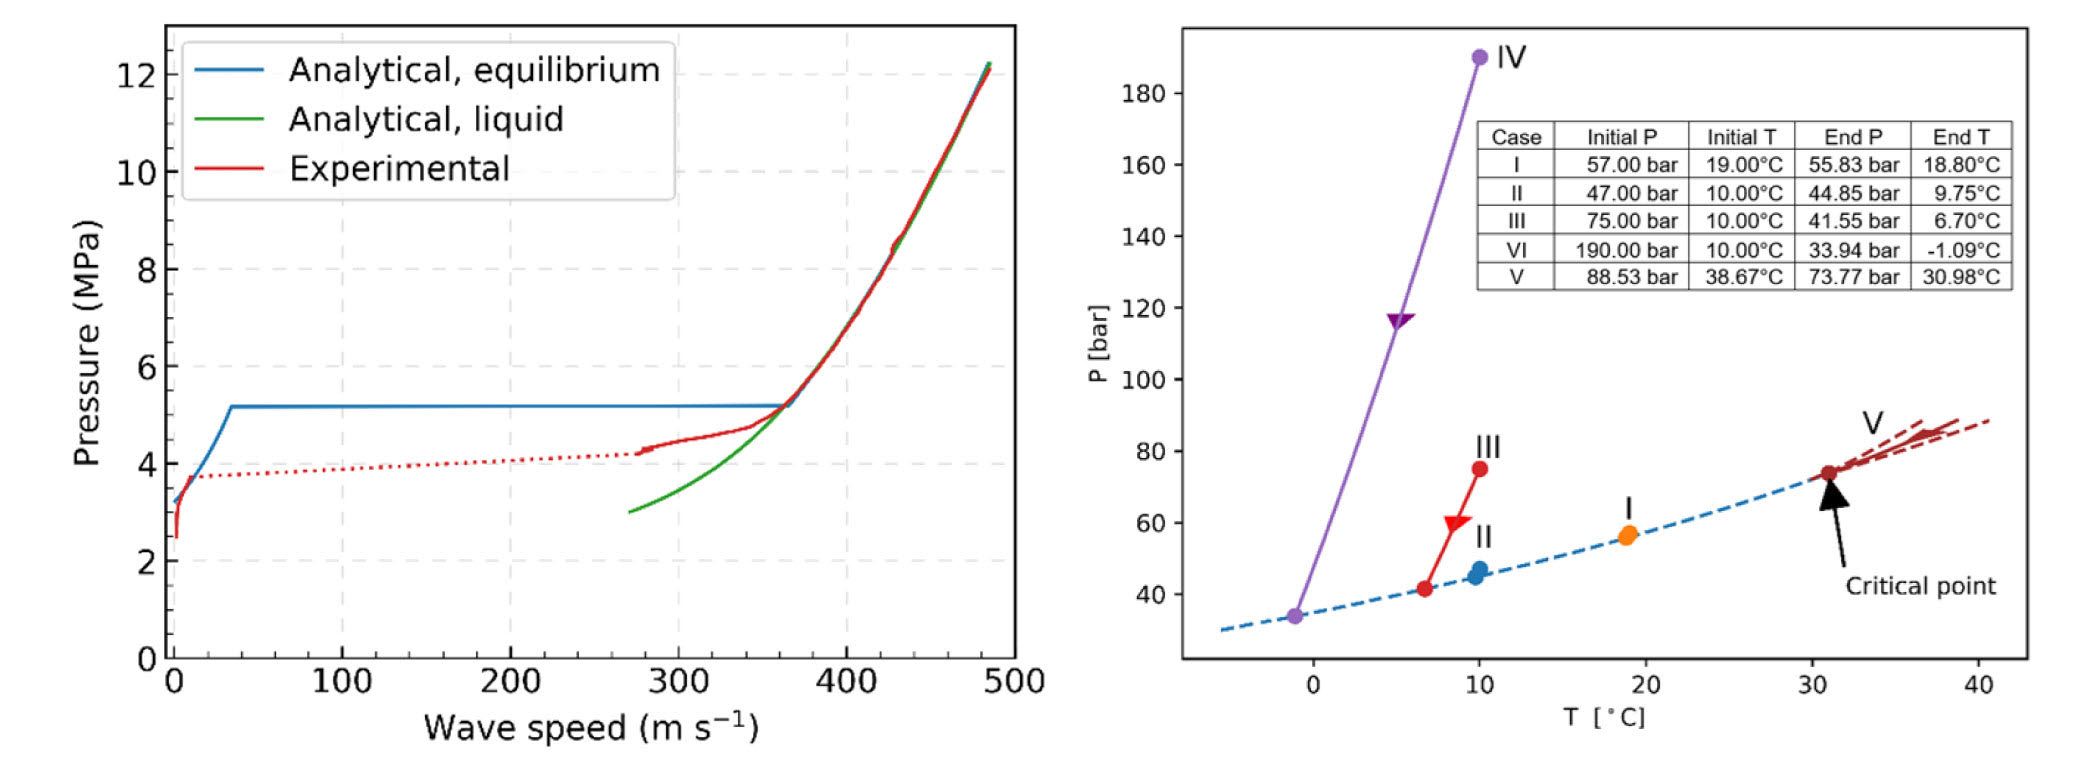 Left: Decompression wave speeds for different pressure levels – comparison between experimental data (red) and calculations (blue and green). The graph shows that the experiments give a lower ‘plateau pressure’ than what is obtained by assuming full equilibrium. Right: Calculated pressure and temperature during decompression of CO2 from different initial states. The graph shows that (for dense-phase CO2) a higher initial pressure gives a lower saturation pressure and hence lower driving forces for RDF.